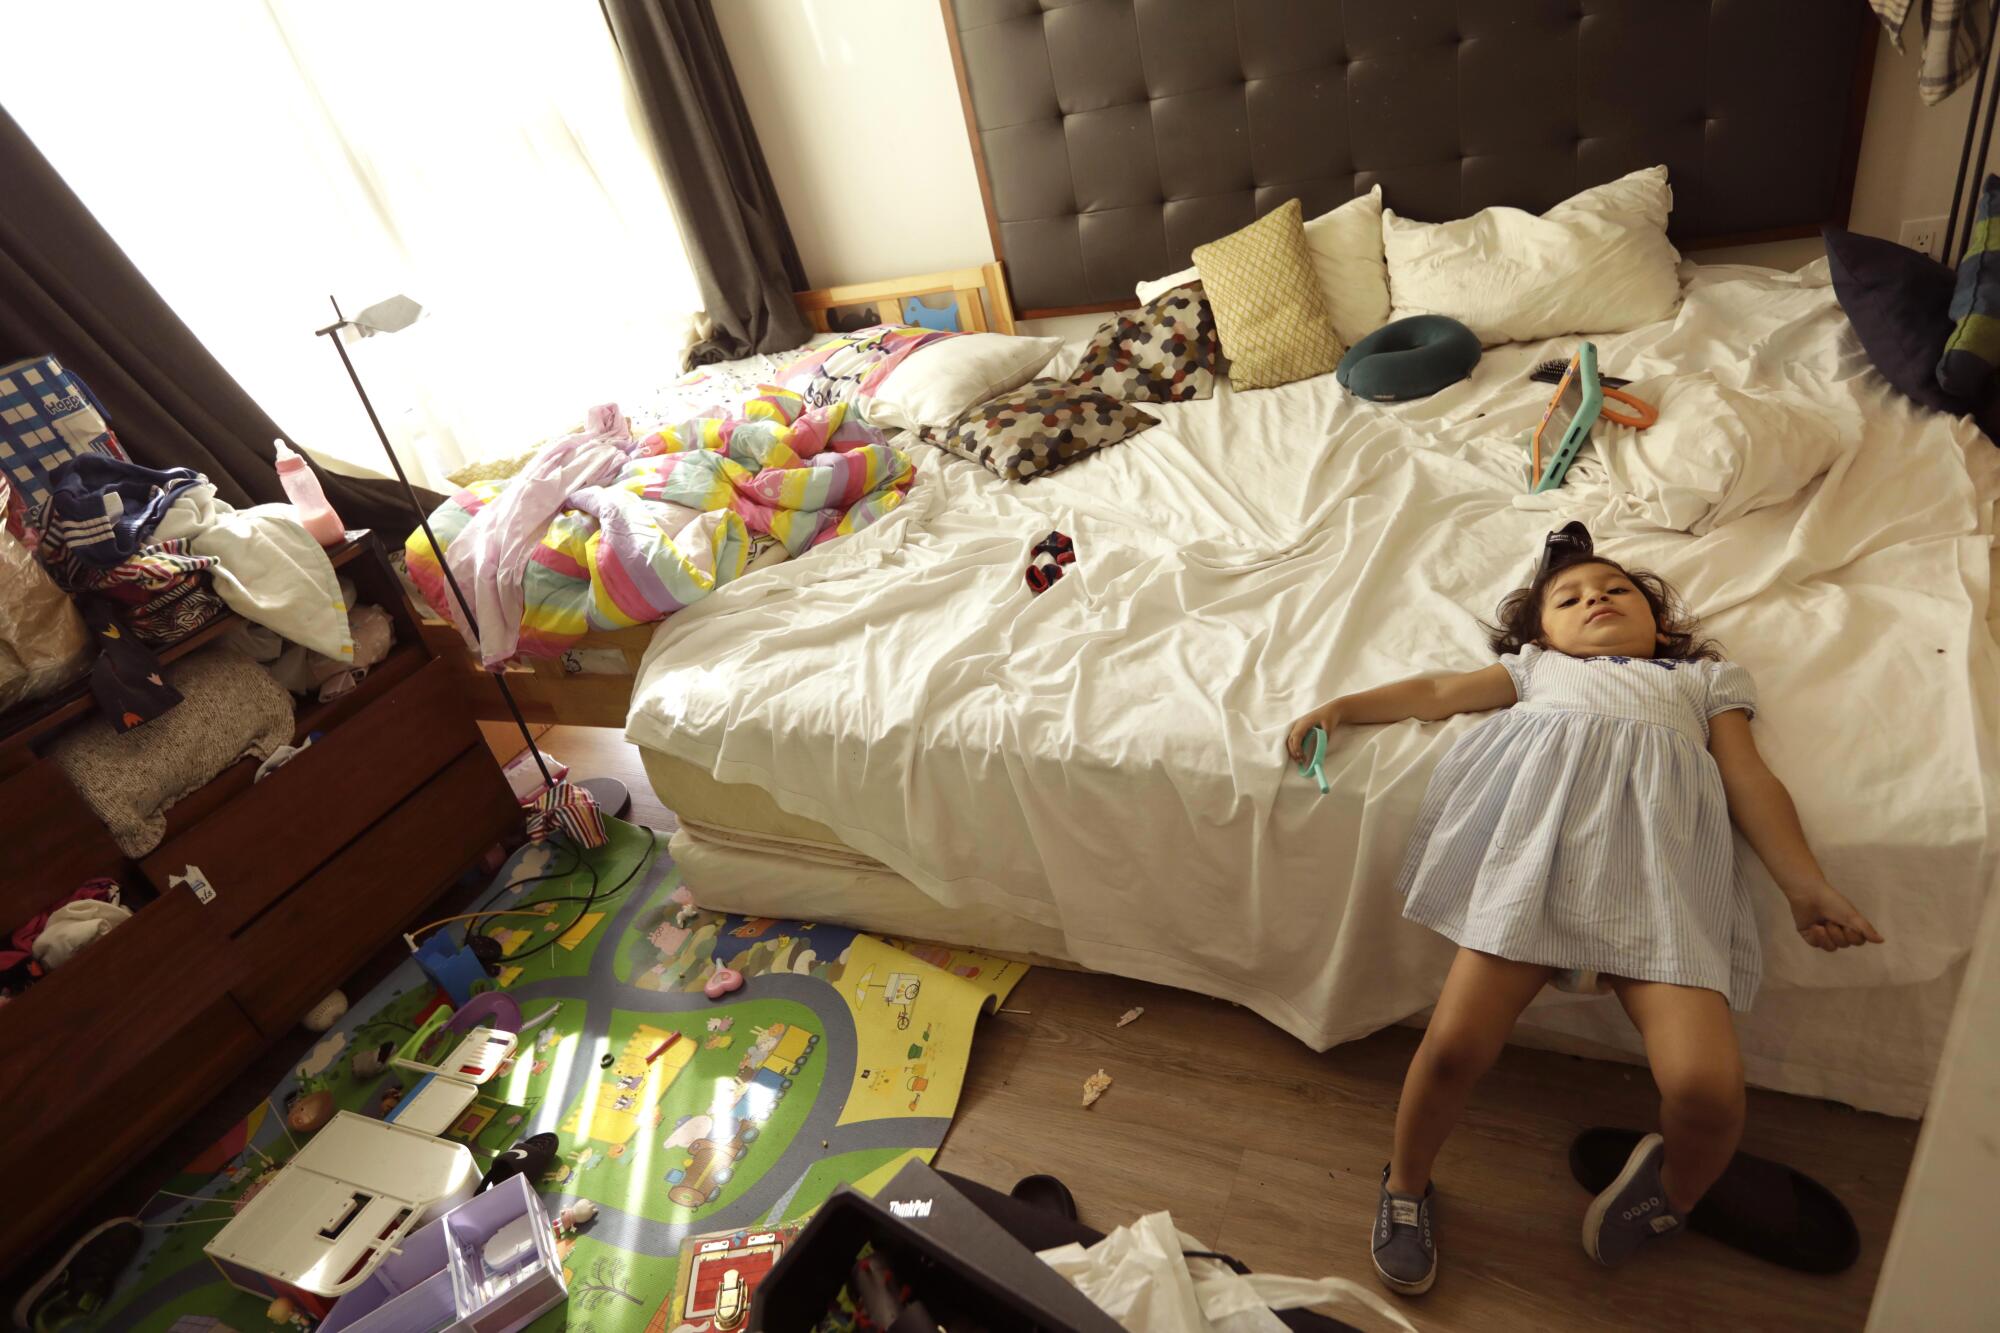 A young girl lies on a bed next to toys